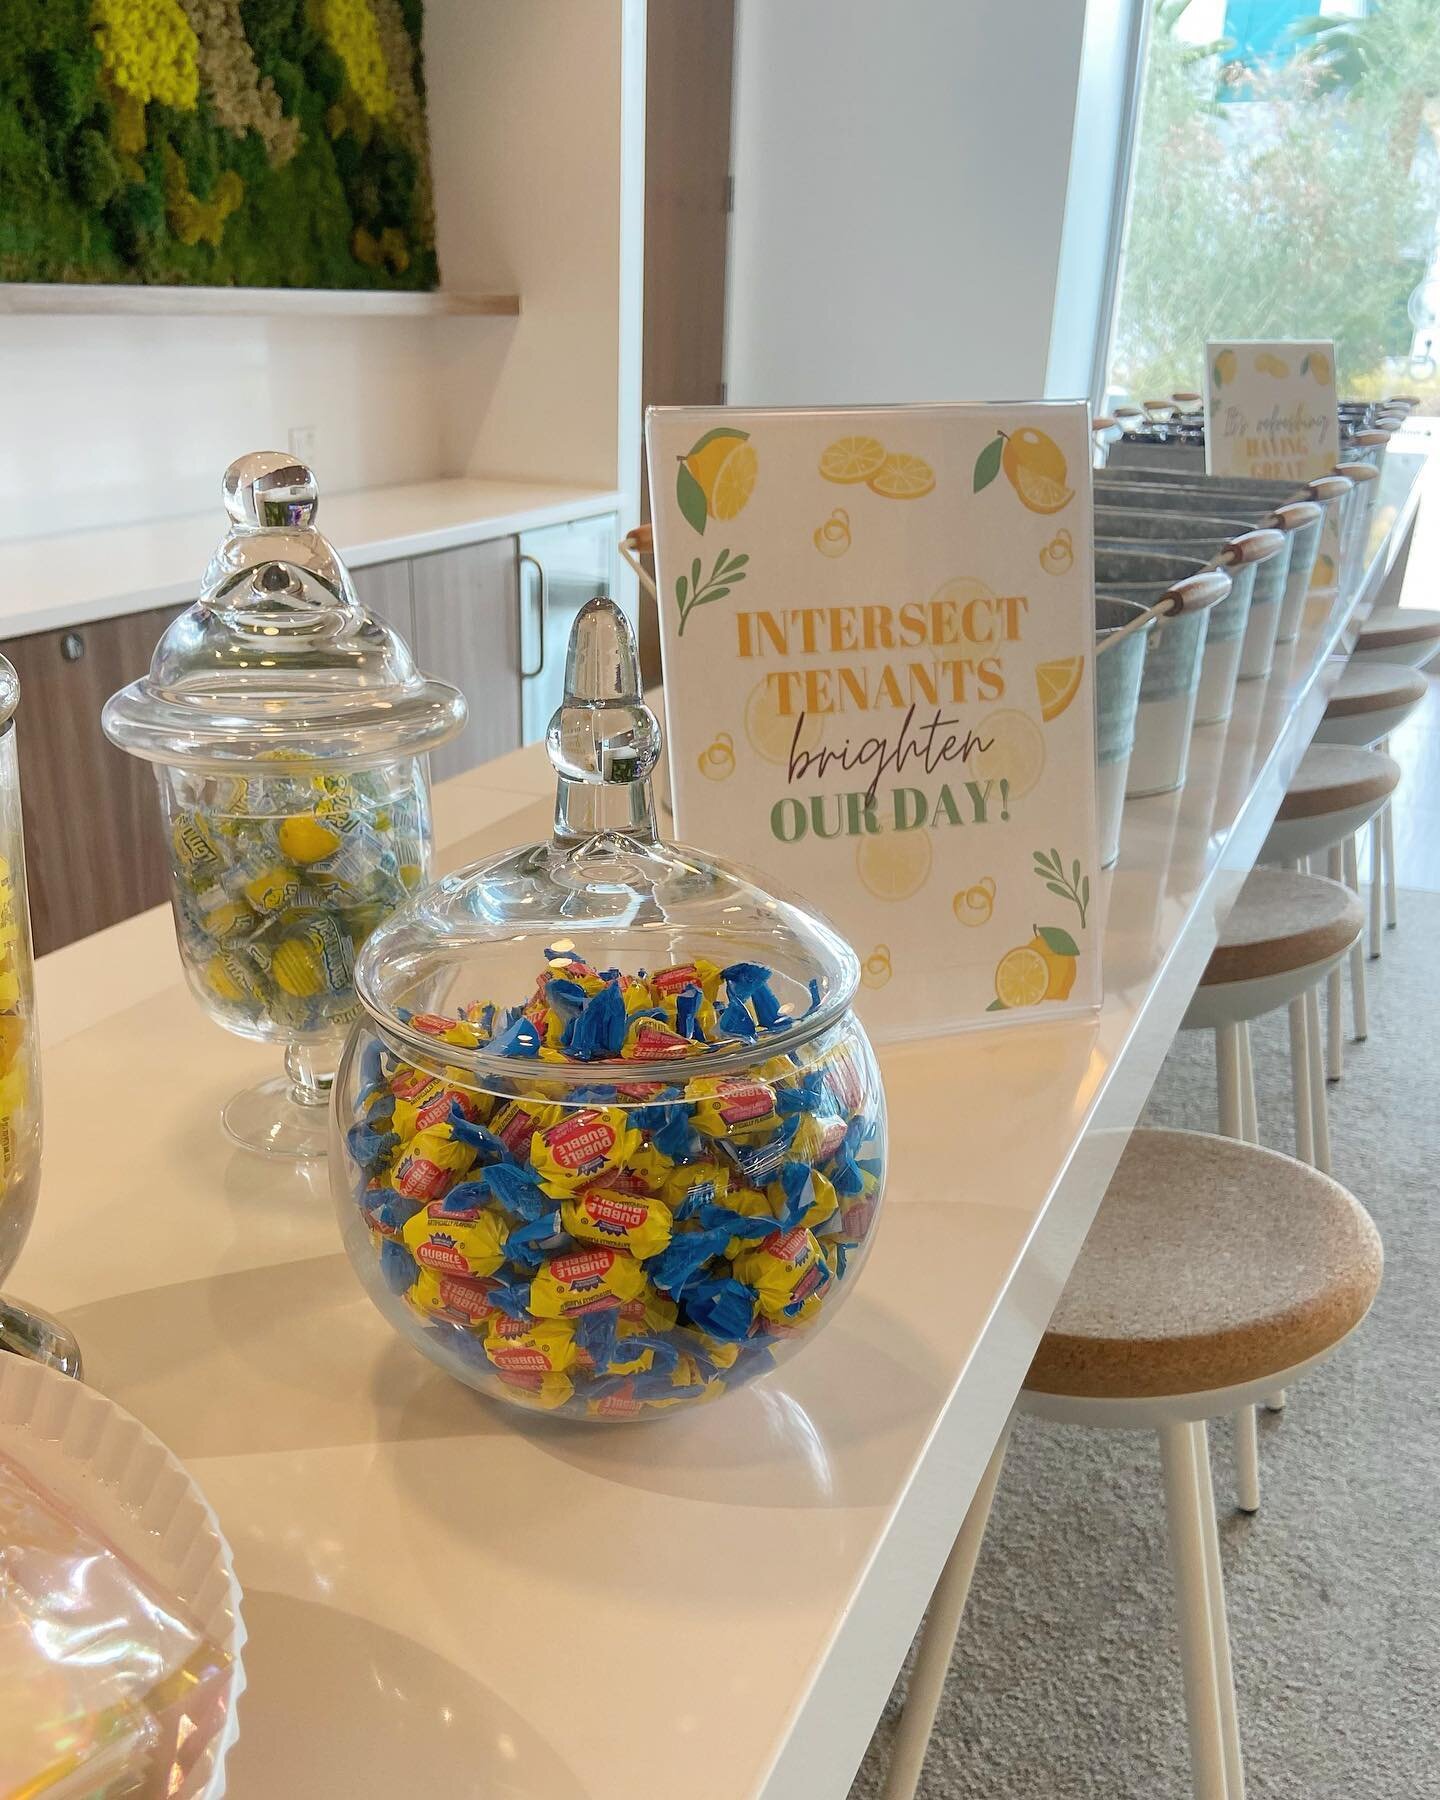 Intersect tenants brighten our day! ☀️🍋📯 Enjoy complimentary summer-themed refreshments and candy today in the Game Lounge located in Building C (across from the Fitness Center)!